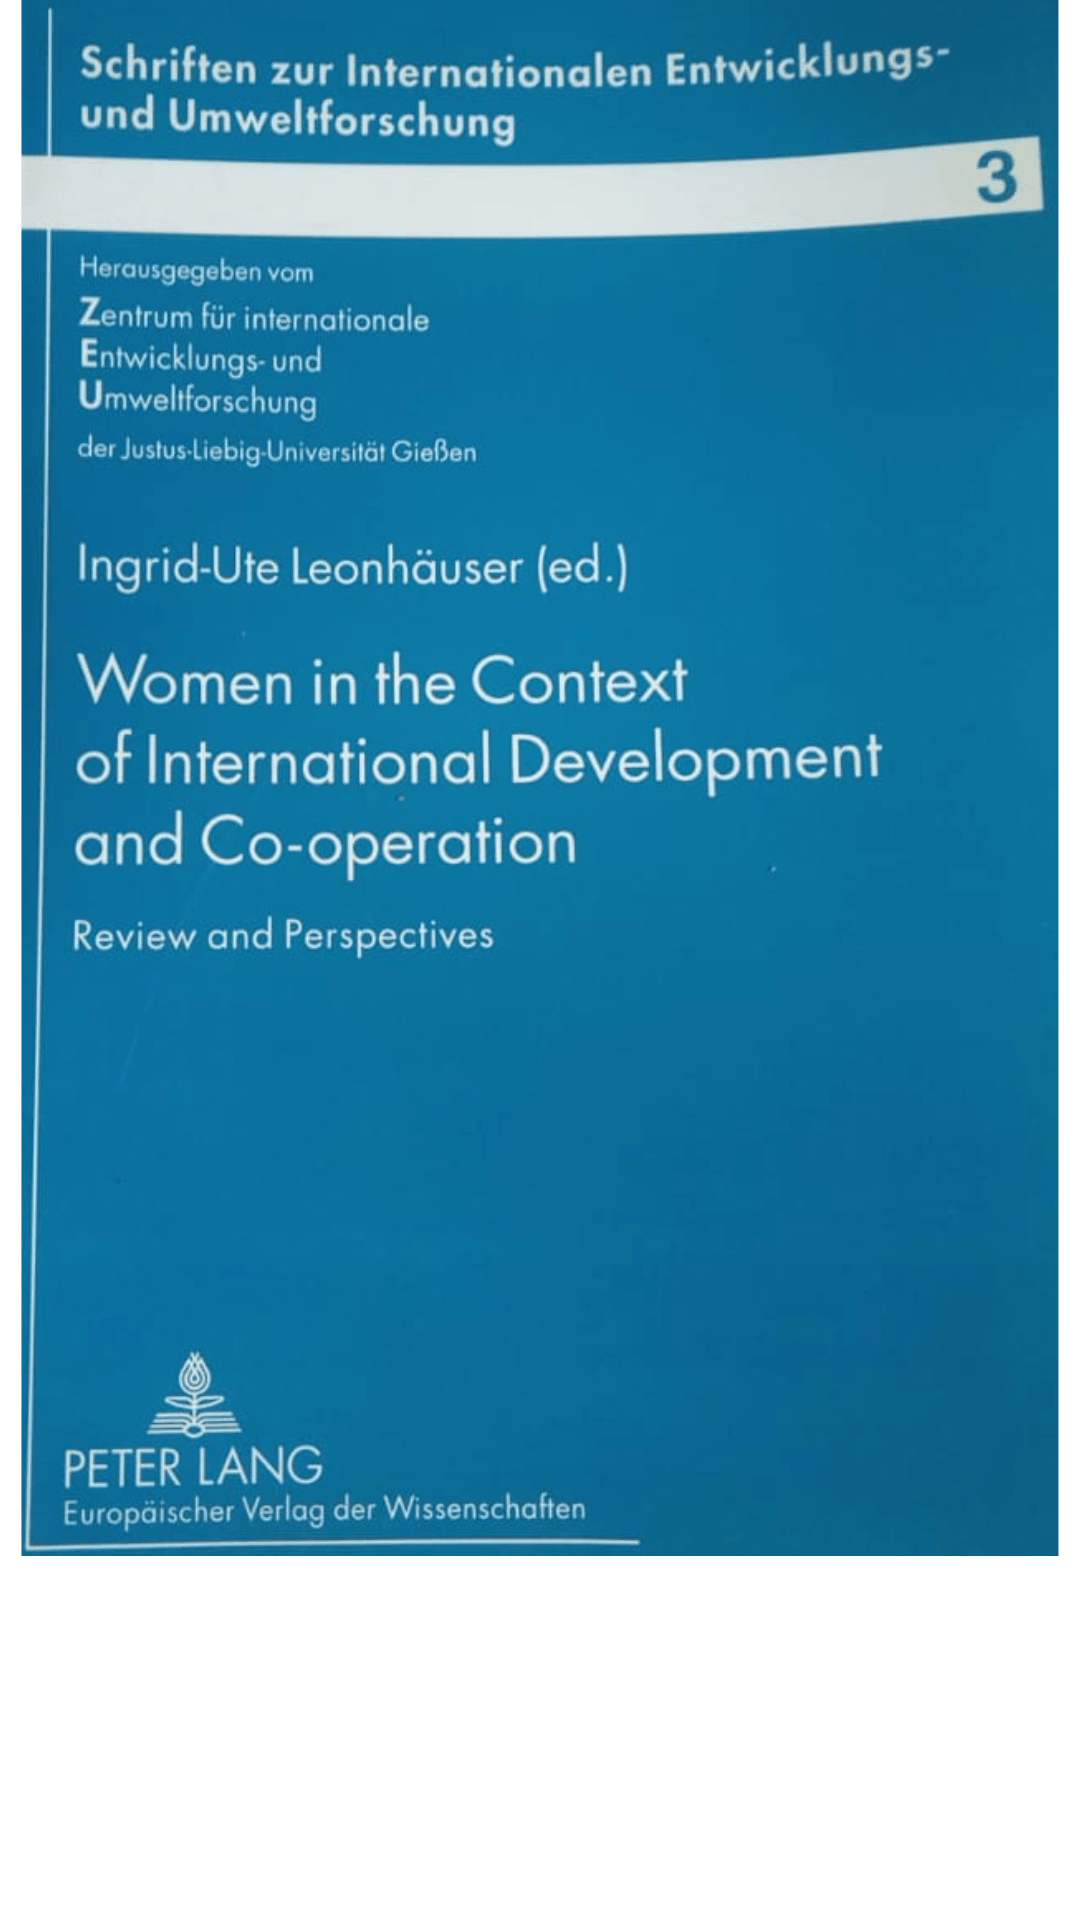 Women in the Context of International Development and Co-operation: Review and Perspectives